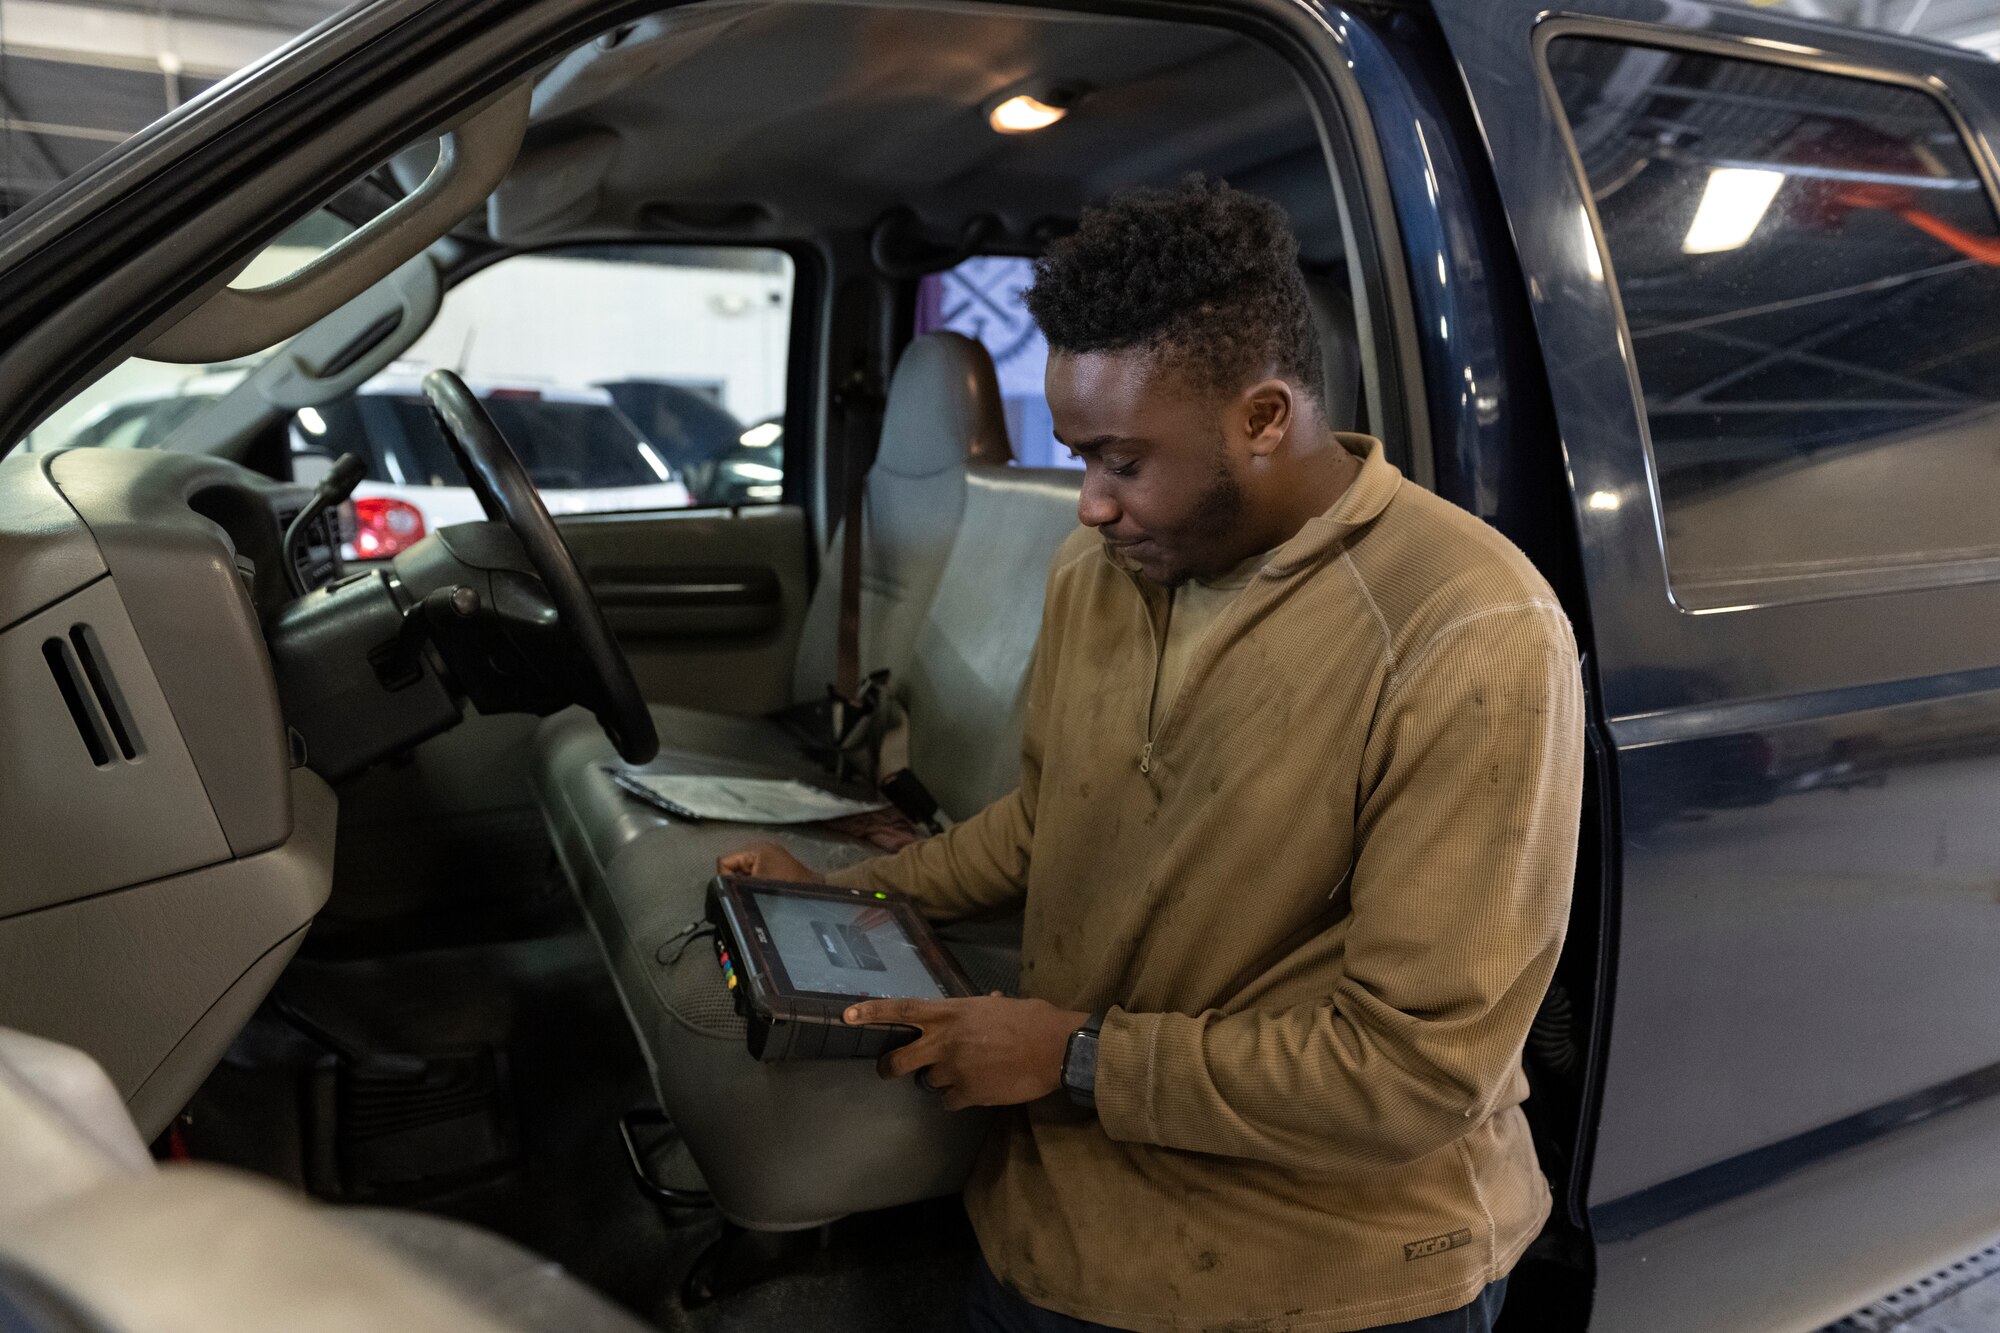 A photo of an Airman leaning against a truck, holding an iPad of sorts looking at it.